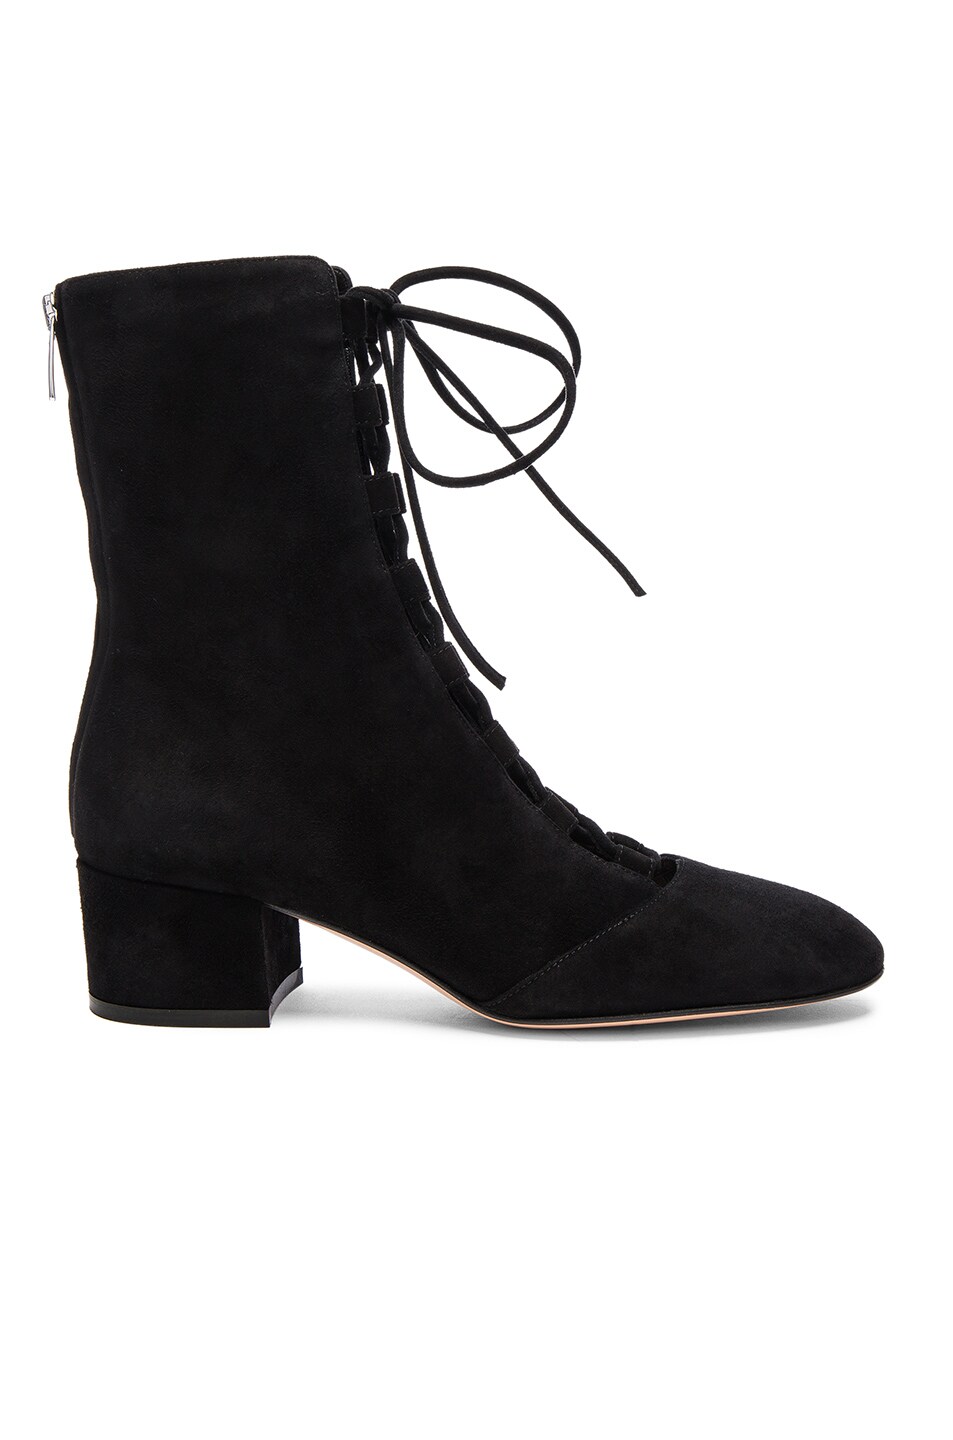 Image 1 of Gianvito Rossi Suede Lace Up Boots in Black